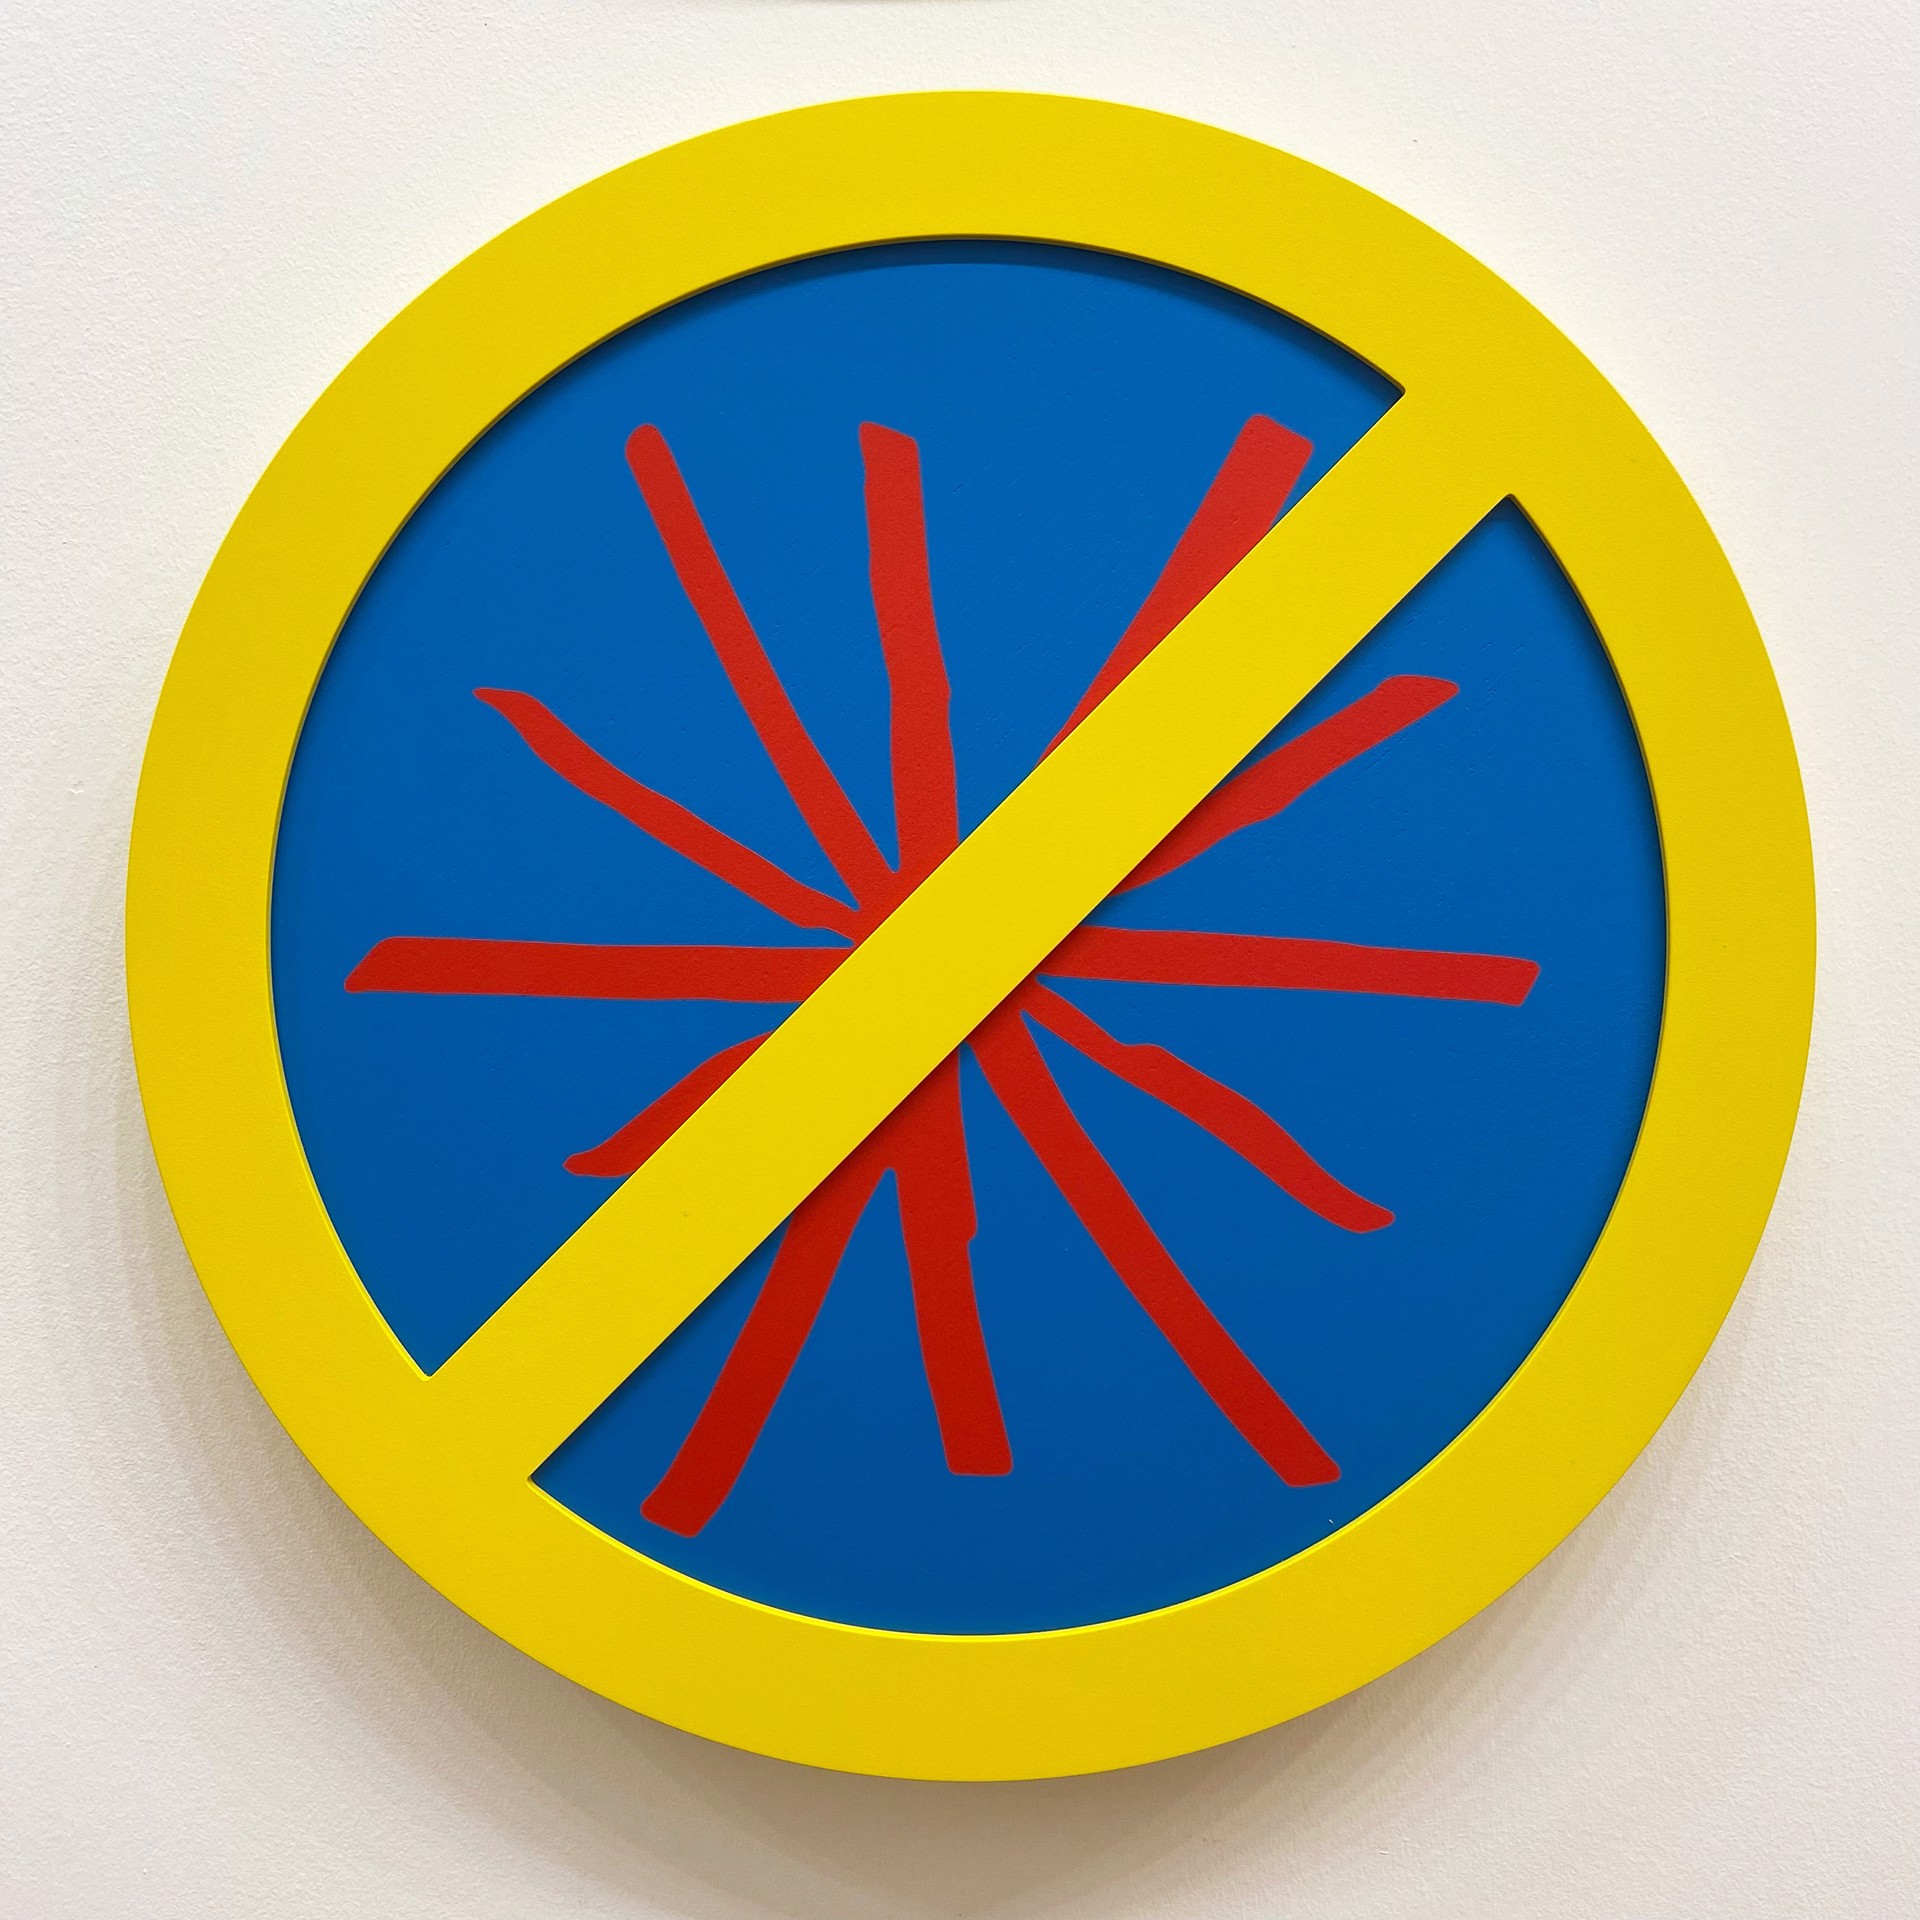 No Assholes (Red on Blue) by Michael Porten